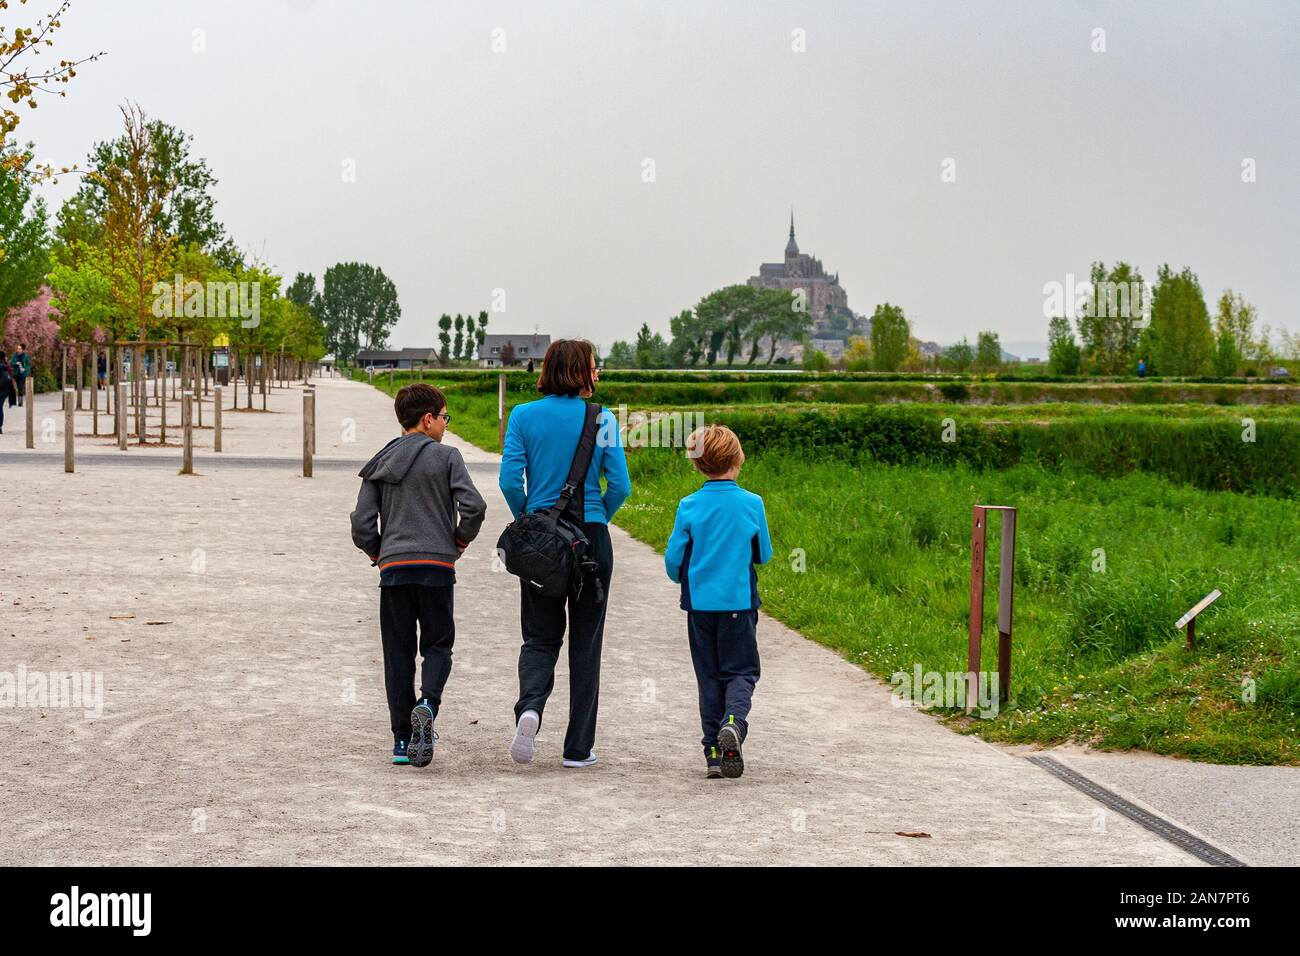 Mother and sons on their way to mont saint michel. Normandy, France Stock Photo